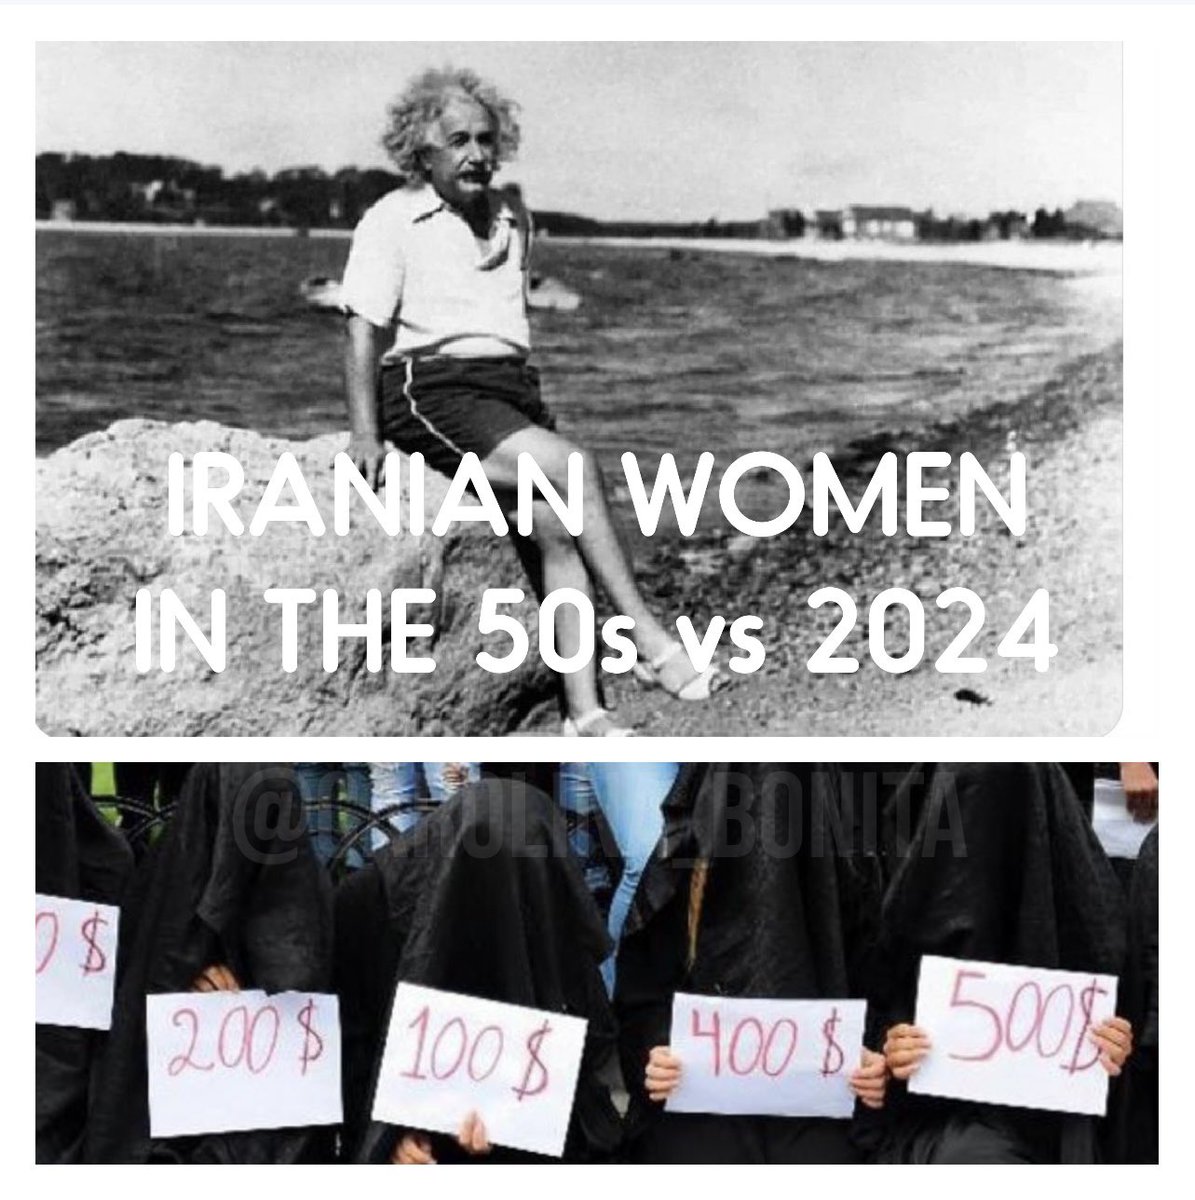 Iran has come a long way in women’s human rights. 🤦🏻‍♀️ Cover them up!😁😂